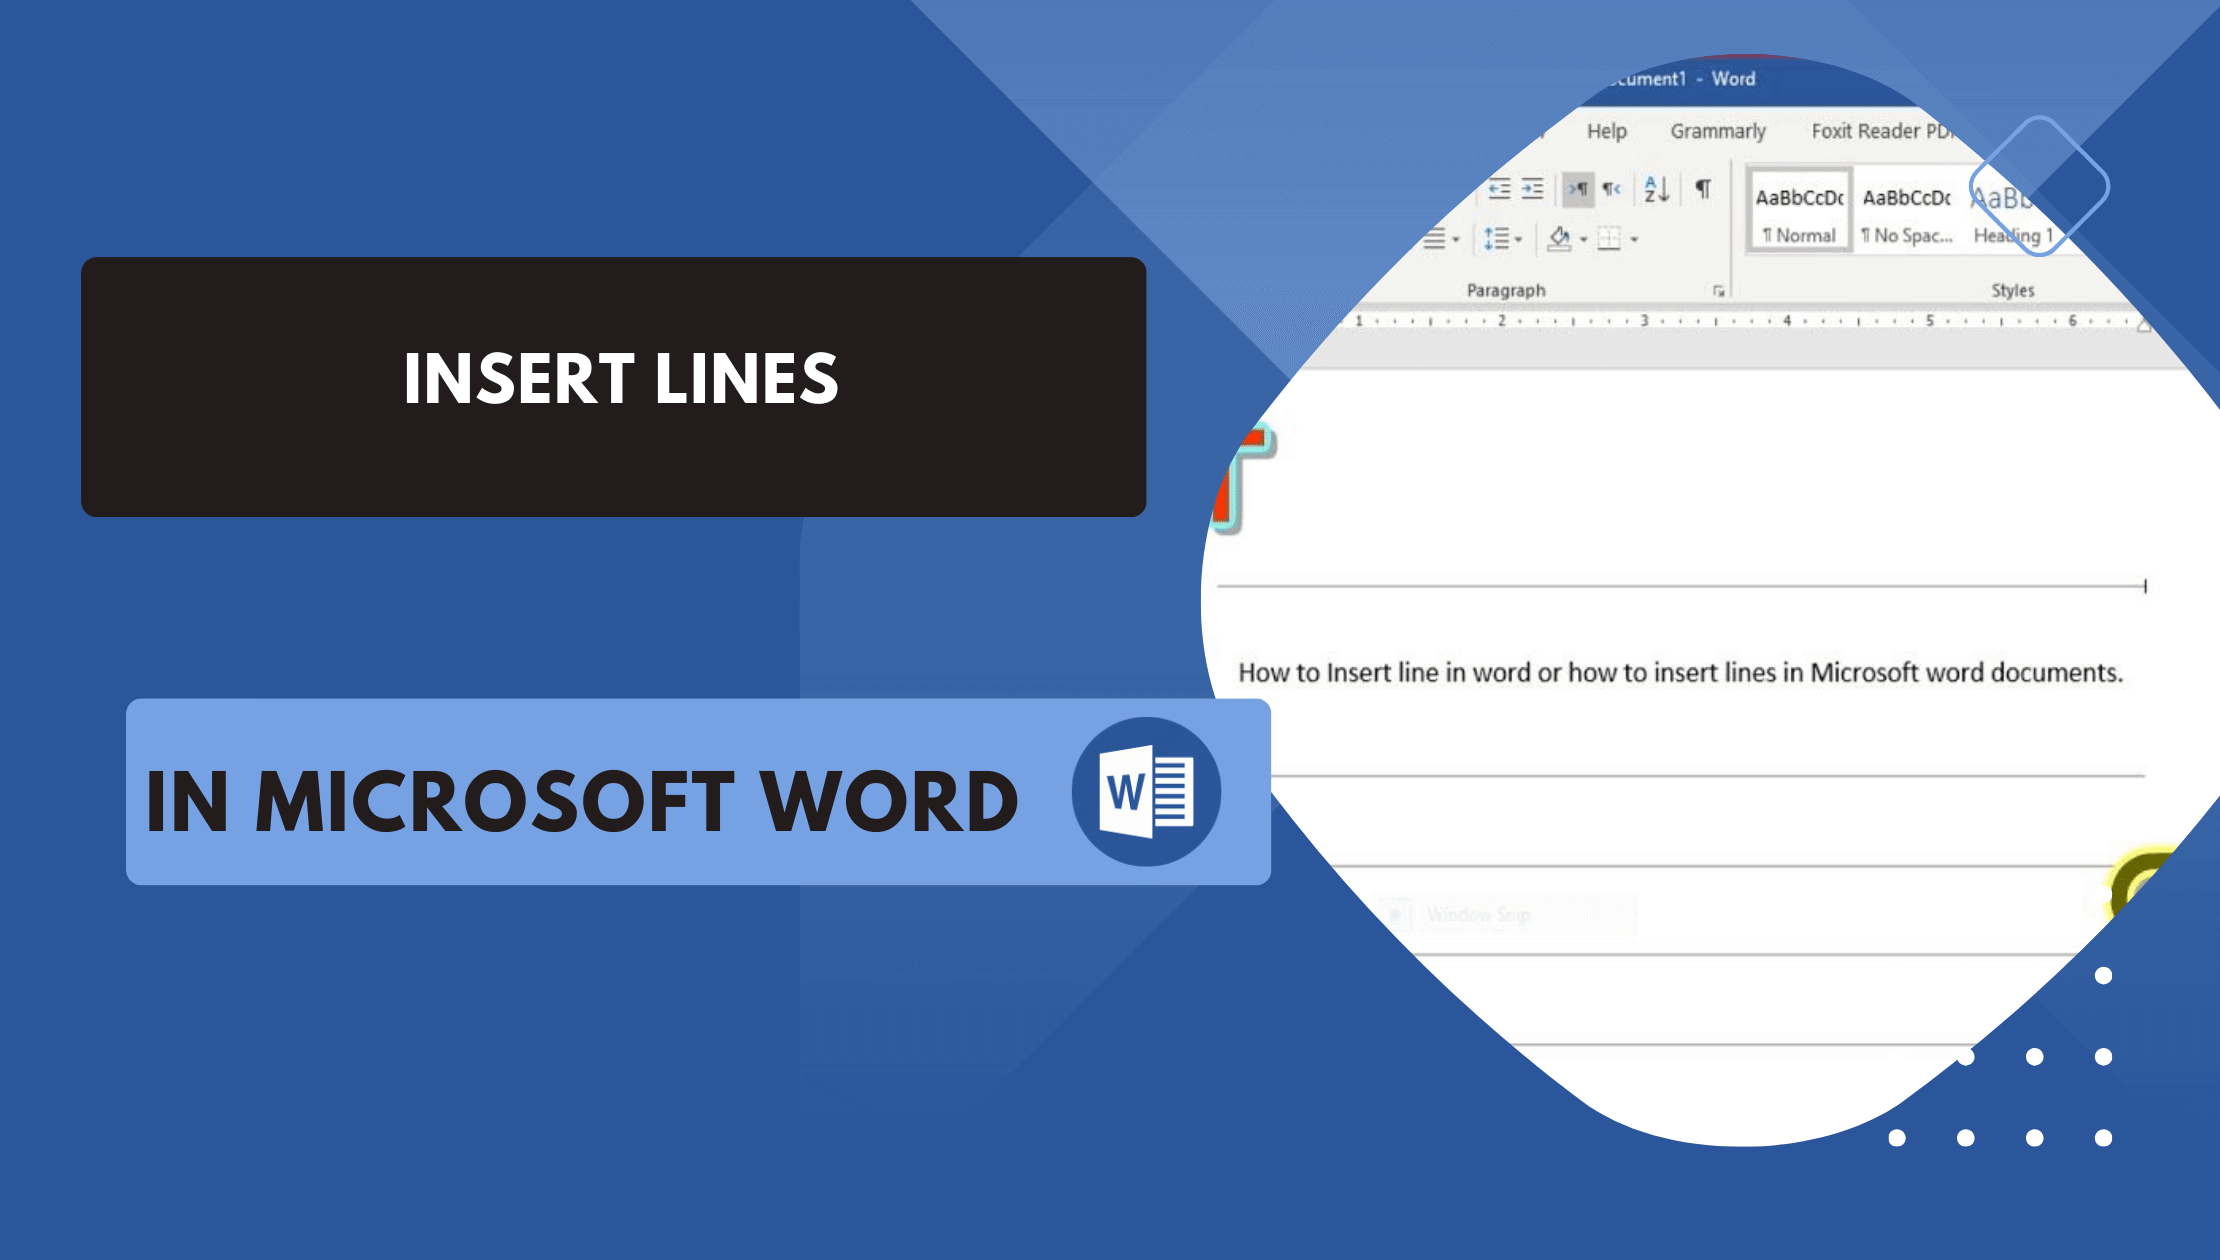 How to Insert Lines in Microsoft Word with This Comprehensive Guide!